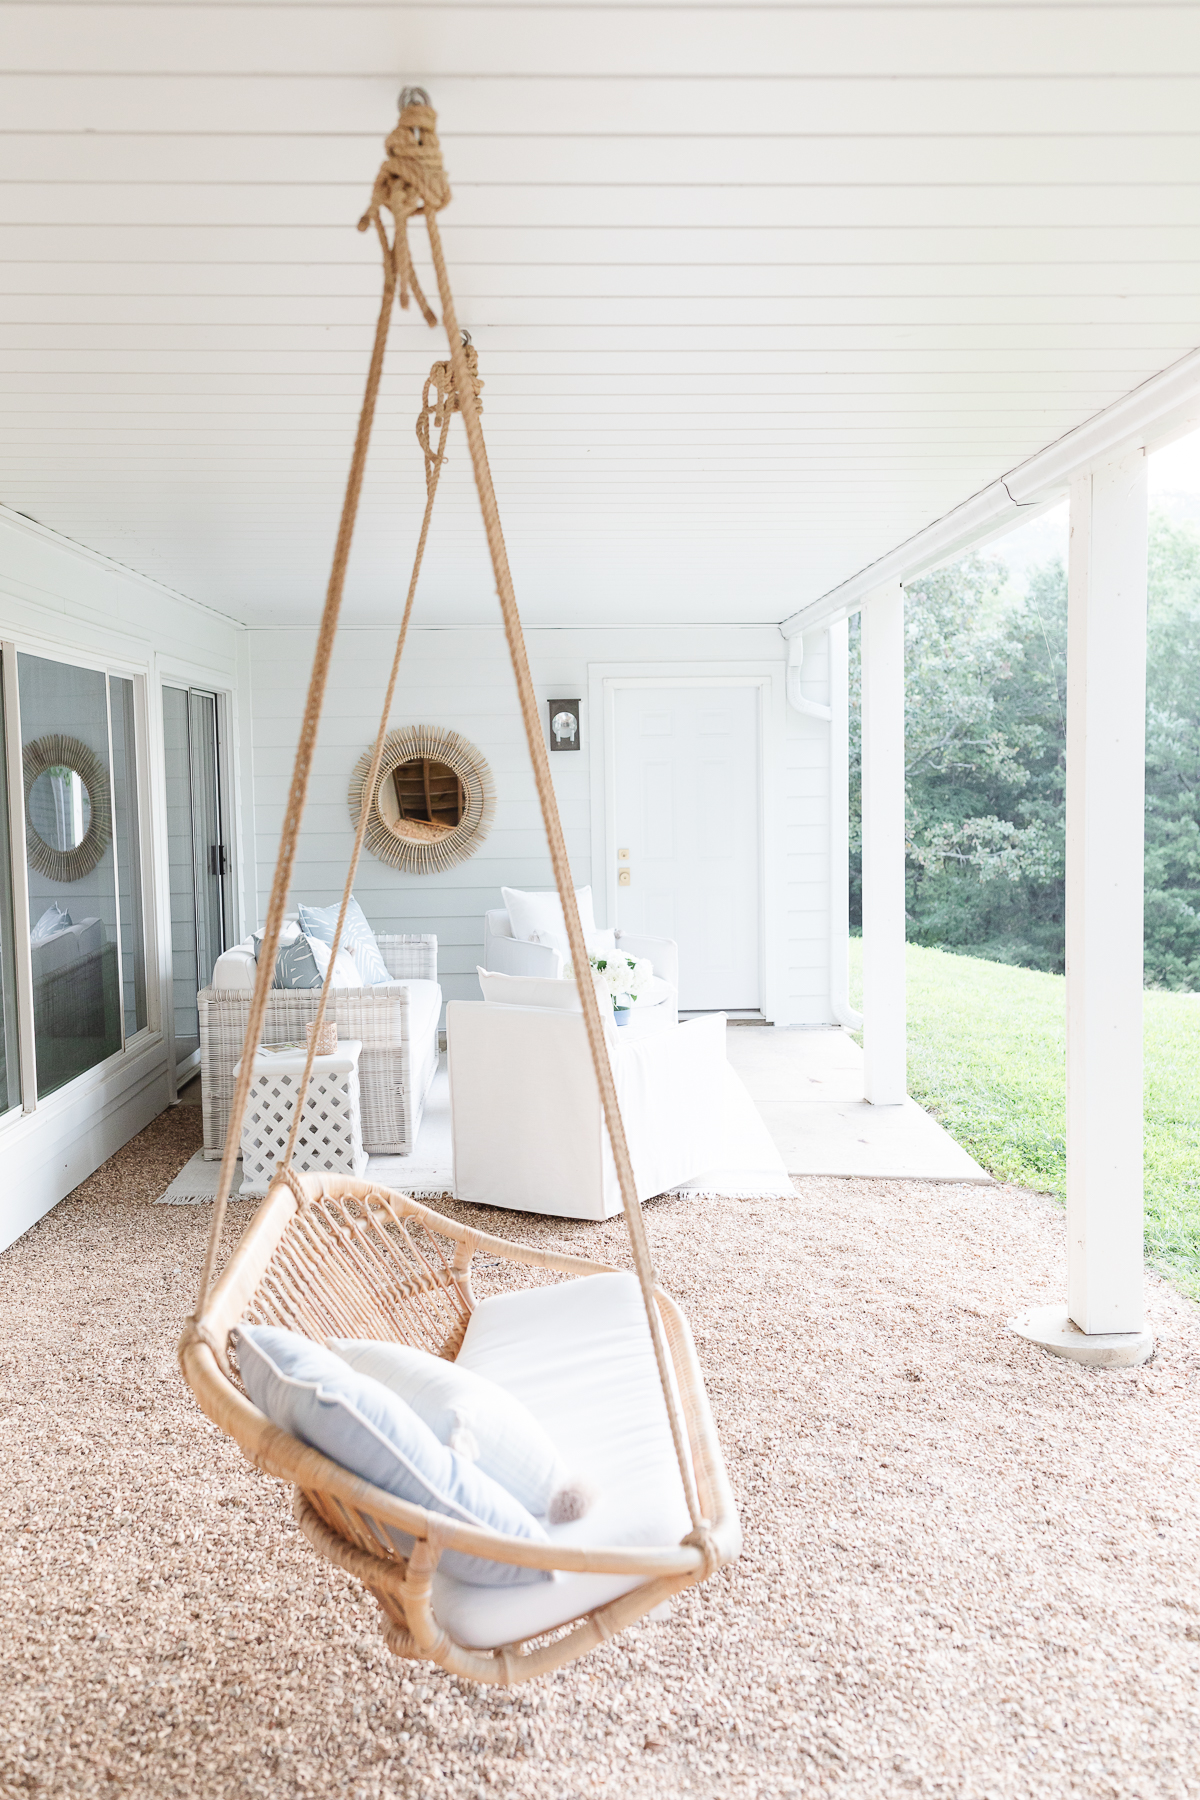 A white hammock, part of Serena and Lily outdoor furniture, hanging on a porch.